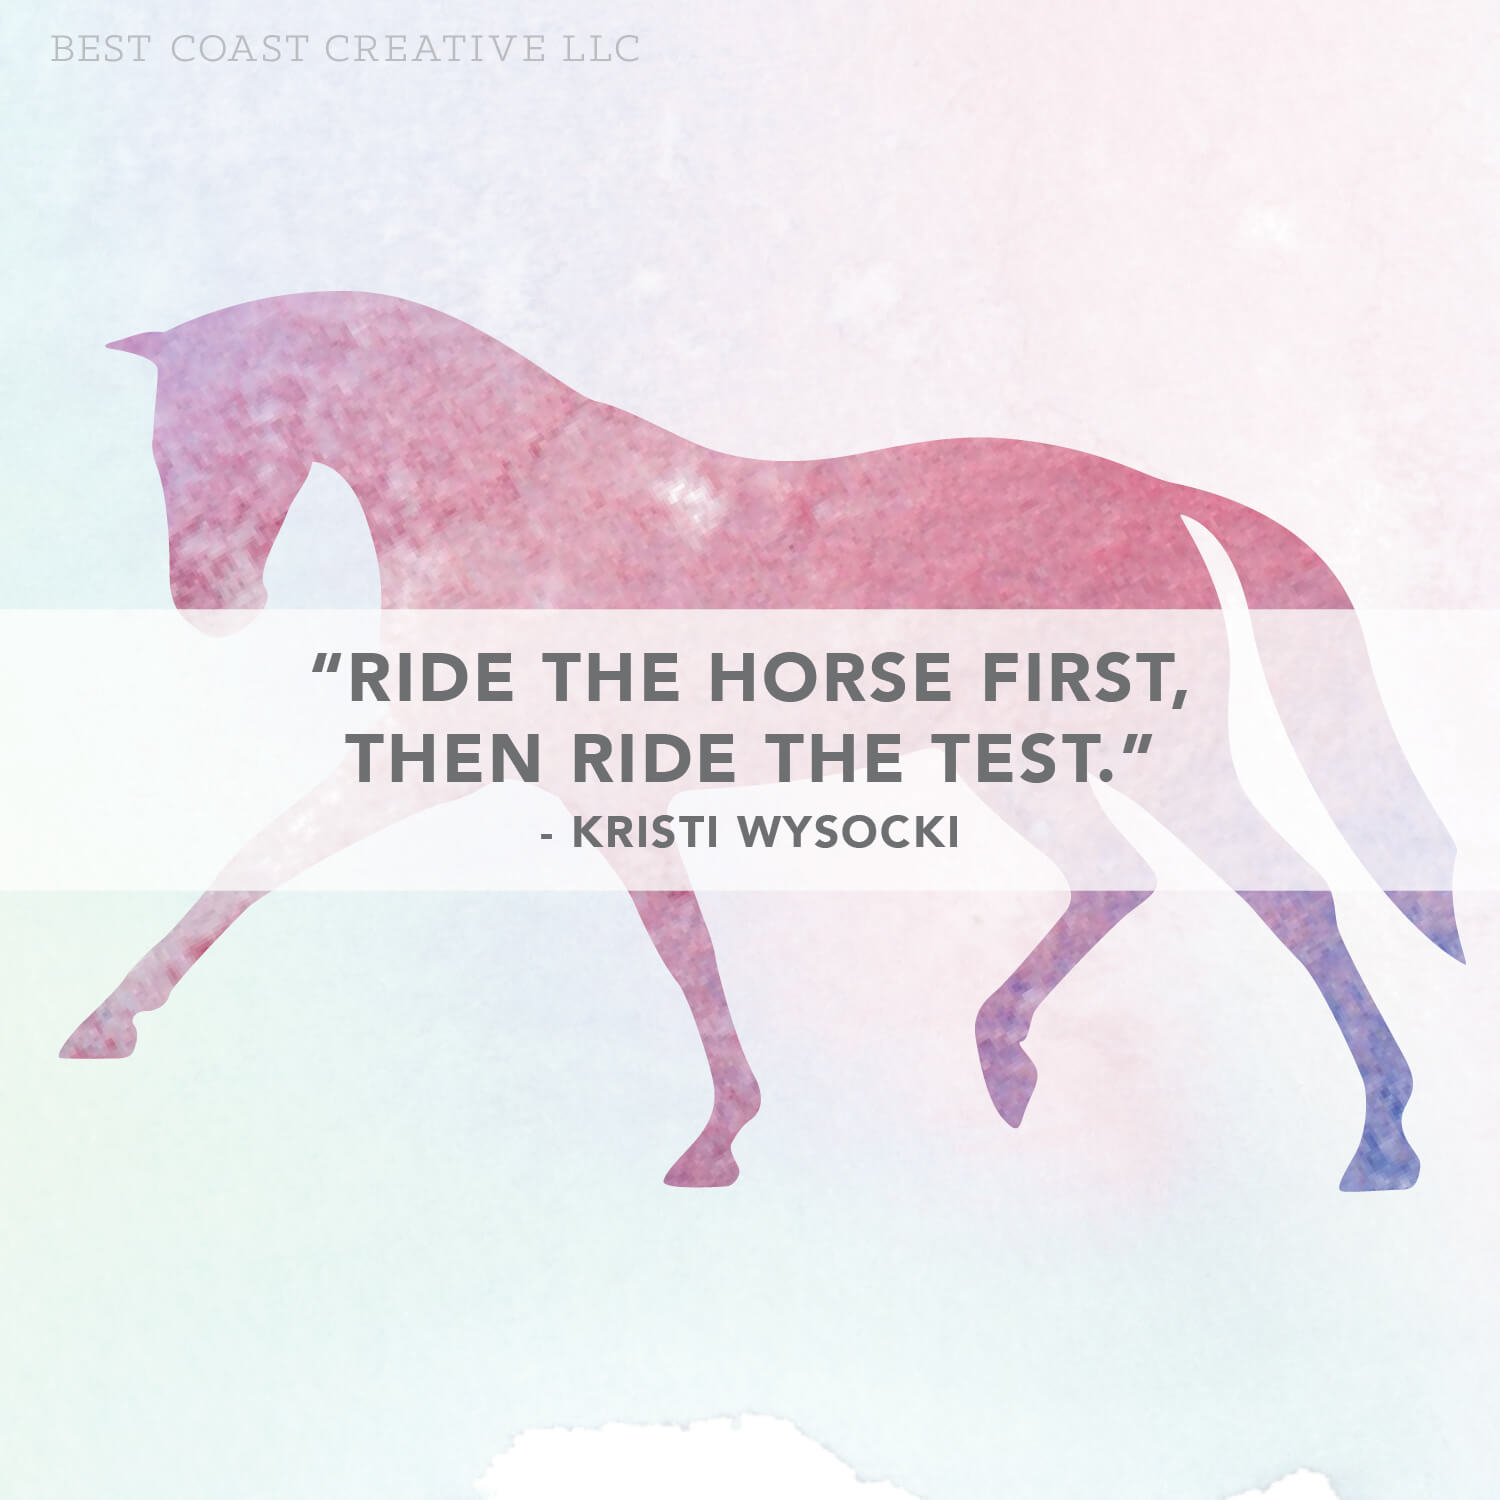 Horse Illustration with Kristi Wysocki clinic quote “Ride the horse first, then ride the test.”